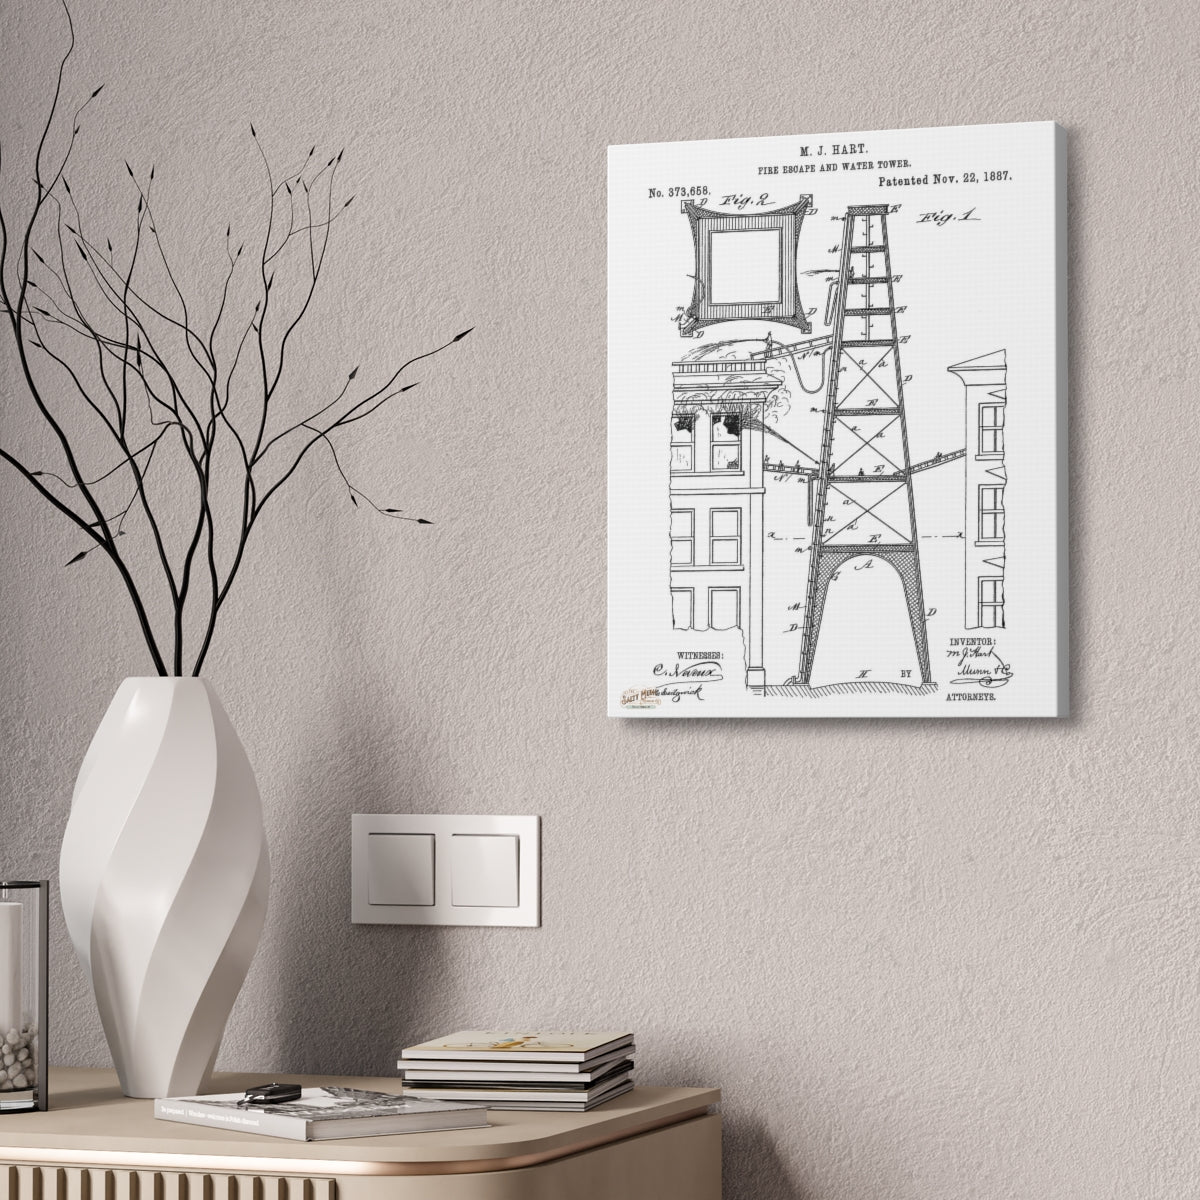 1887 M. J. Hart Fire Escape & Water Tower Patent Wall Art Stretched Canvas, 1.5'' - Salty Medic Clothing Co.